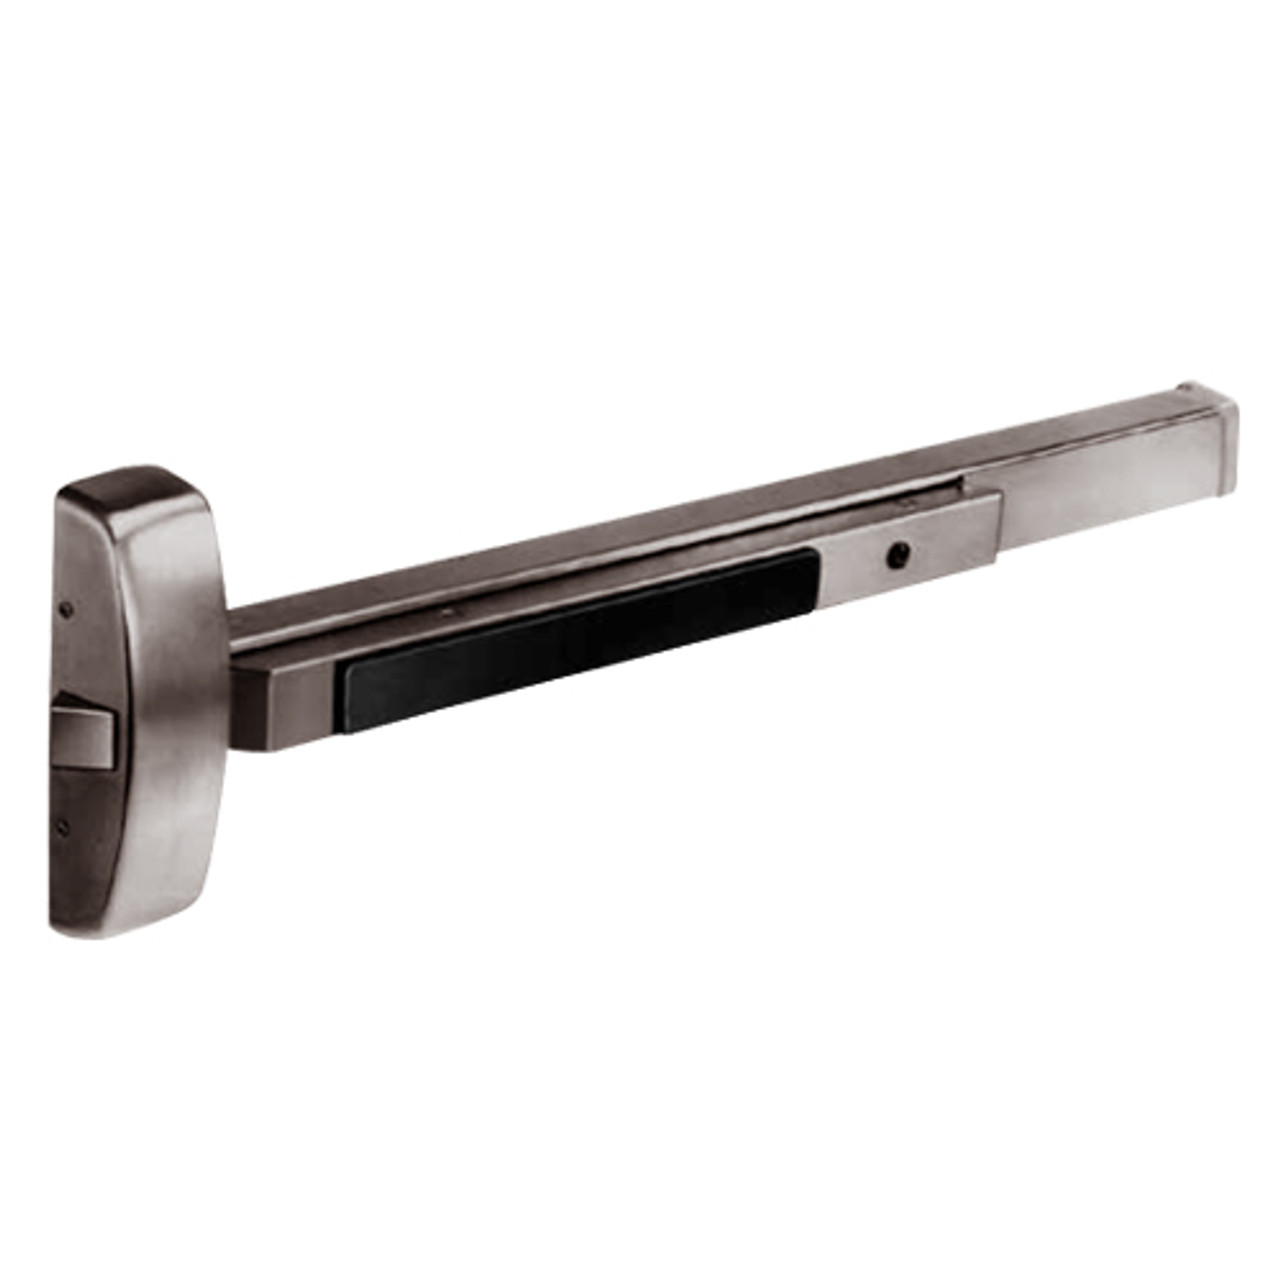 8888E-32D Sargent 80 Series Multi-Function Rim Exit Device in Satin Stainless Steel